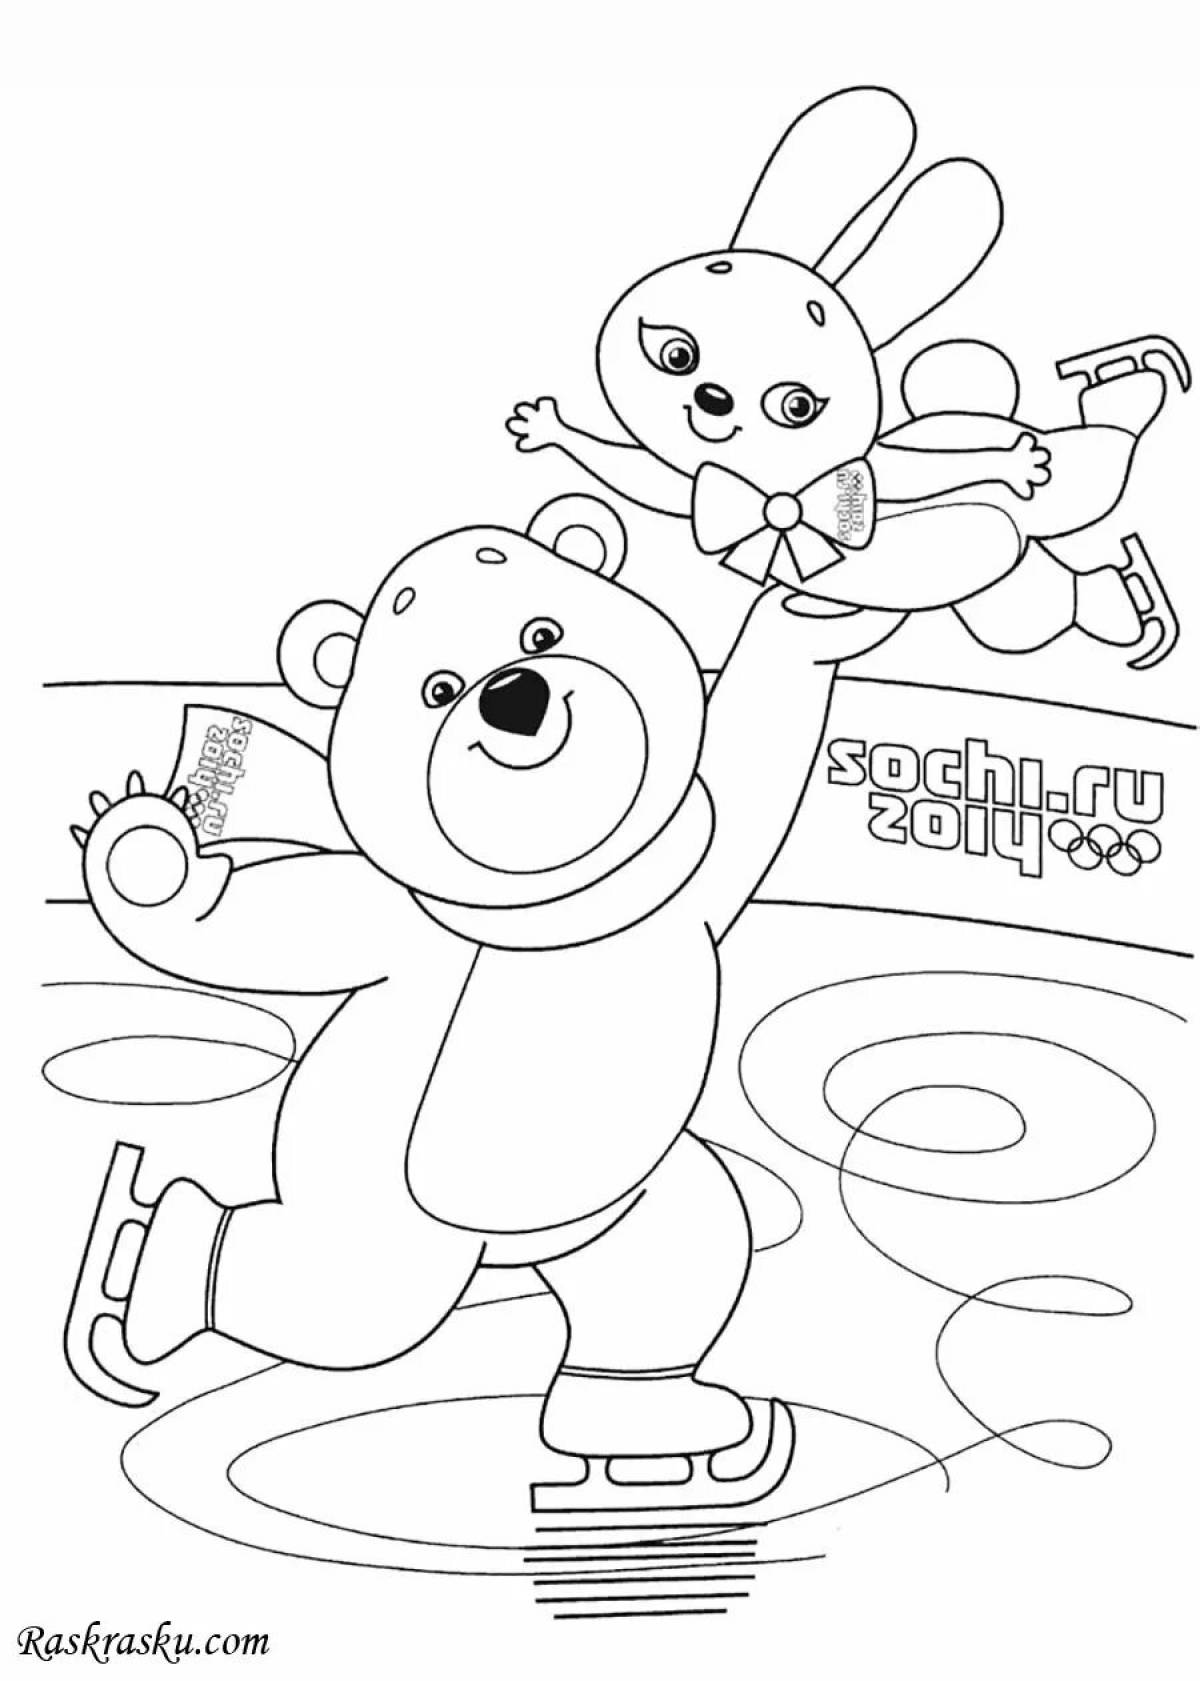 Olympic games for kids #2